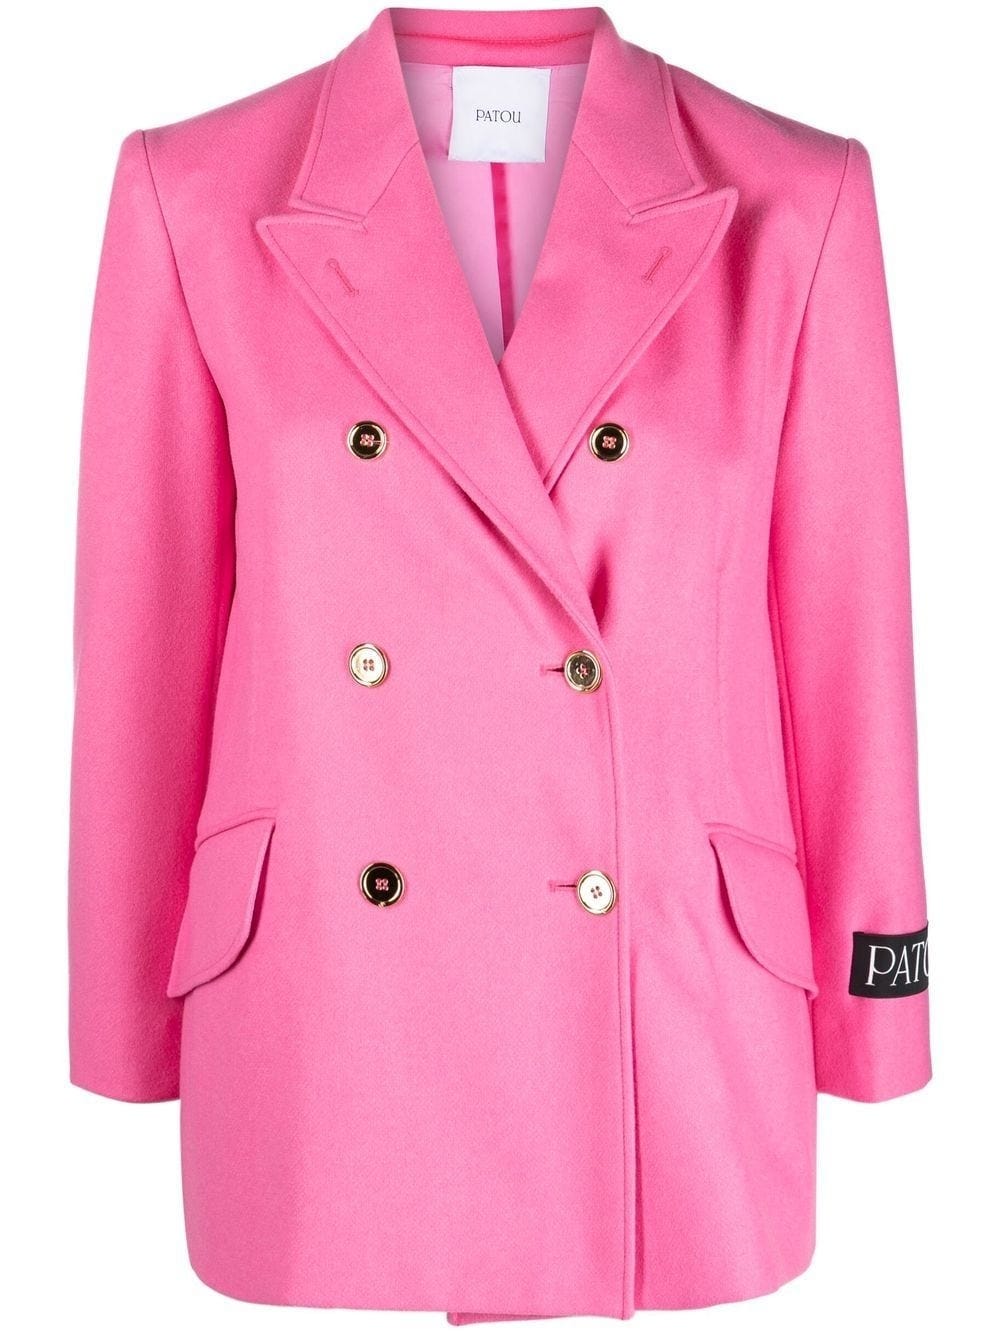 PATOU ICONIC DOUBLE-BREASTED PINK JACKET WITH GOLD BUTTONS